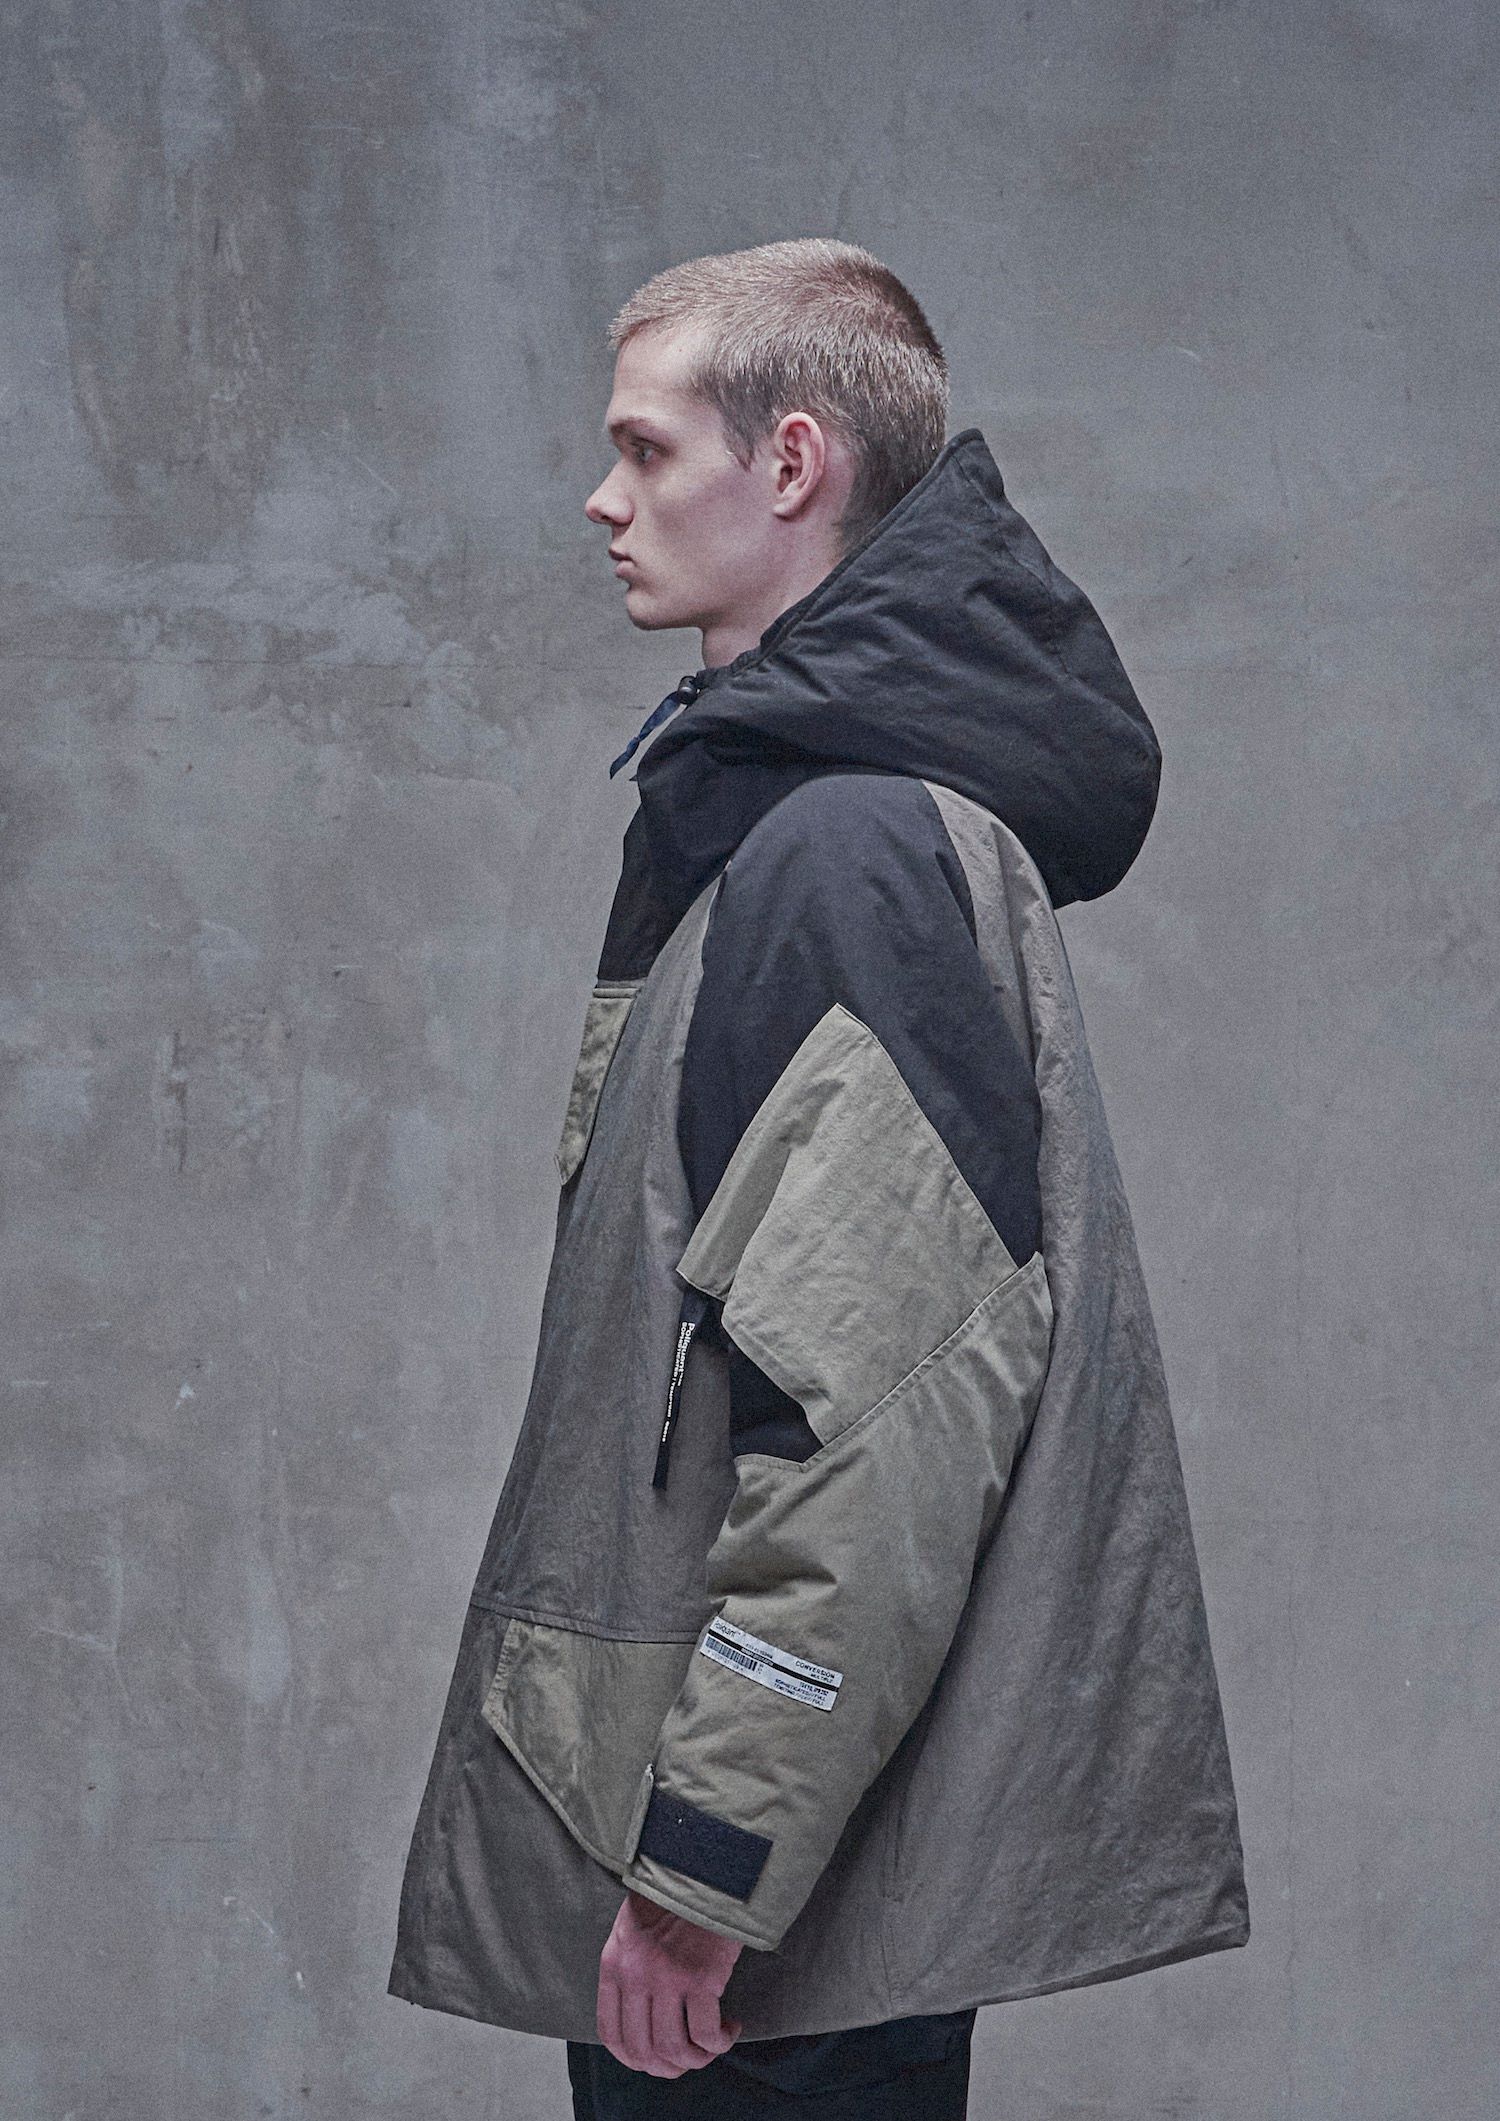 POLIQUANT - THE E.C.W.C.S. DEFORMING HOODED PADDING FIELD JACKET